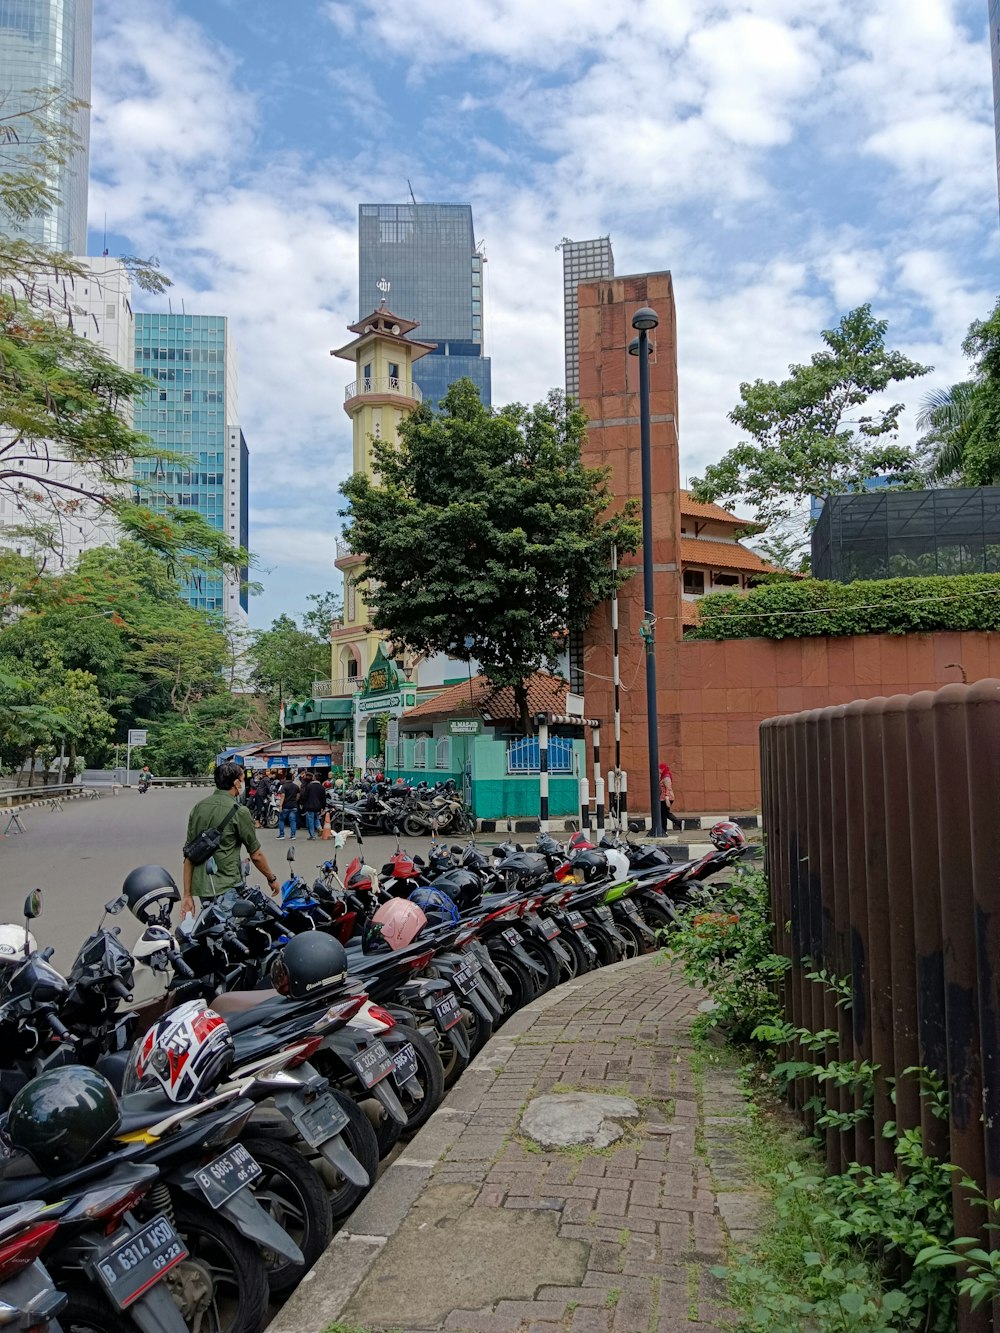 a group of motorcycles parked on the side of a road